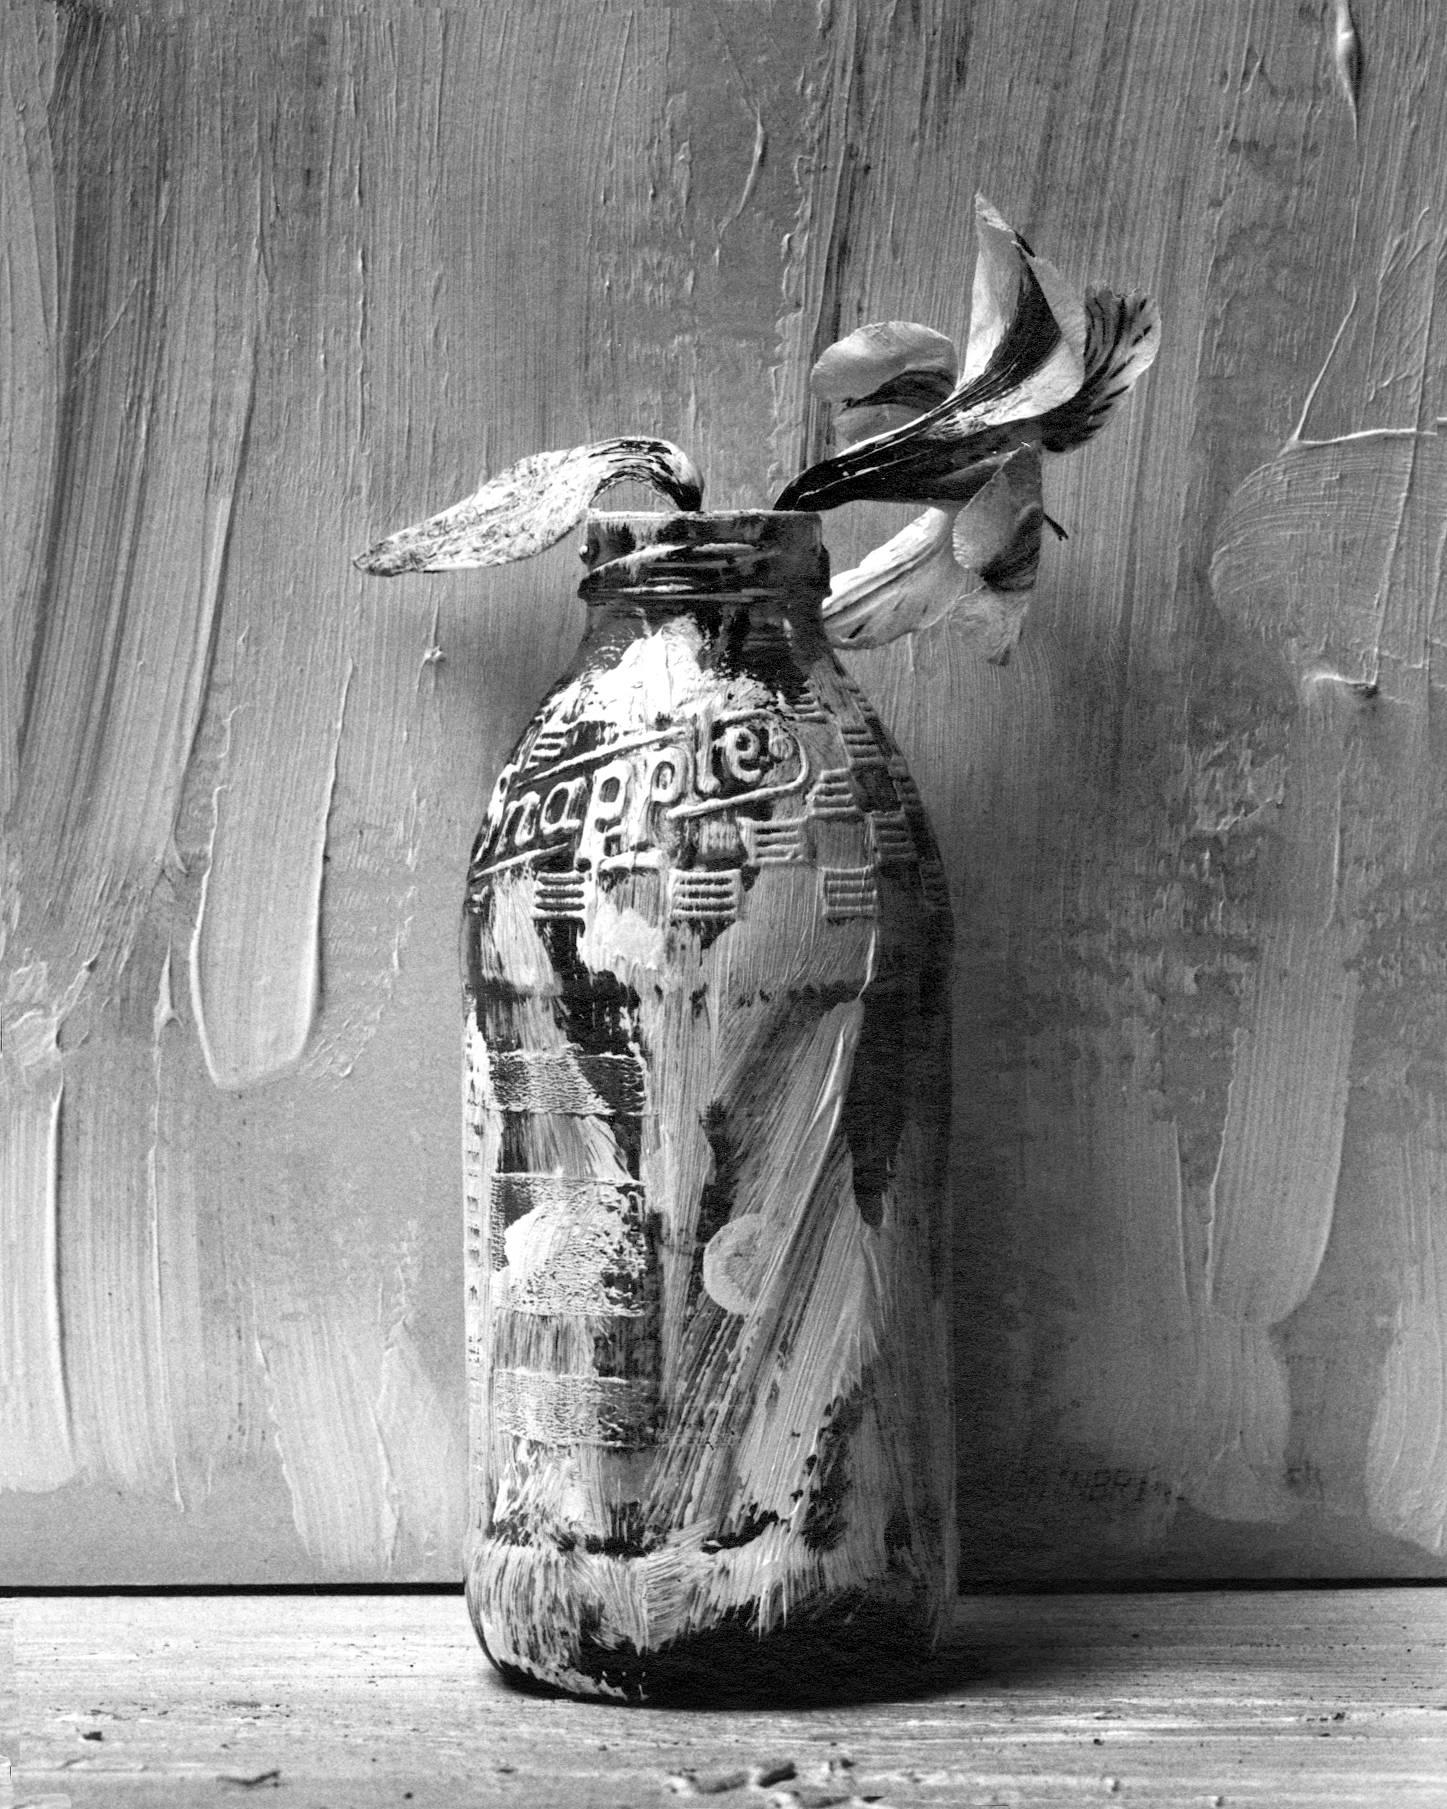 Alexandra Catiere Black and White Photograph - Picture of Painted Bottle with Flower, Black and white Still life photography